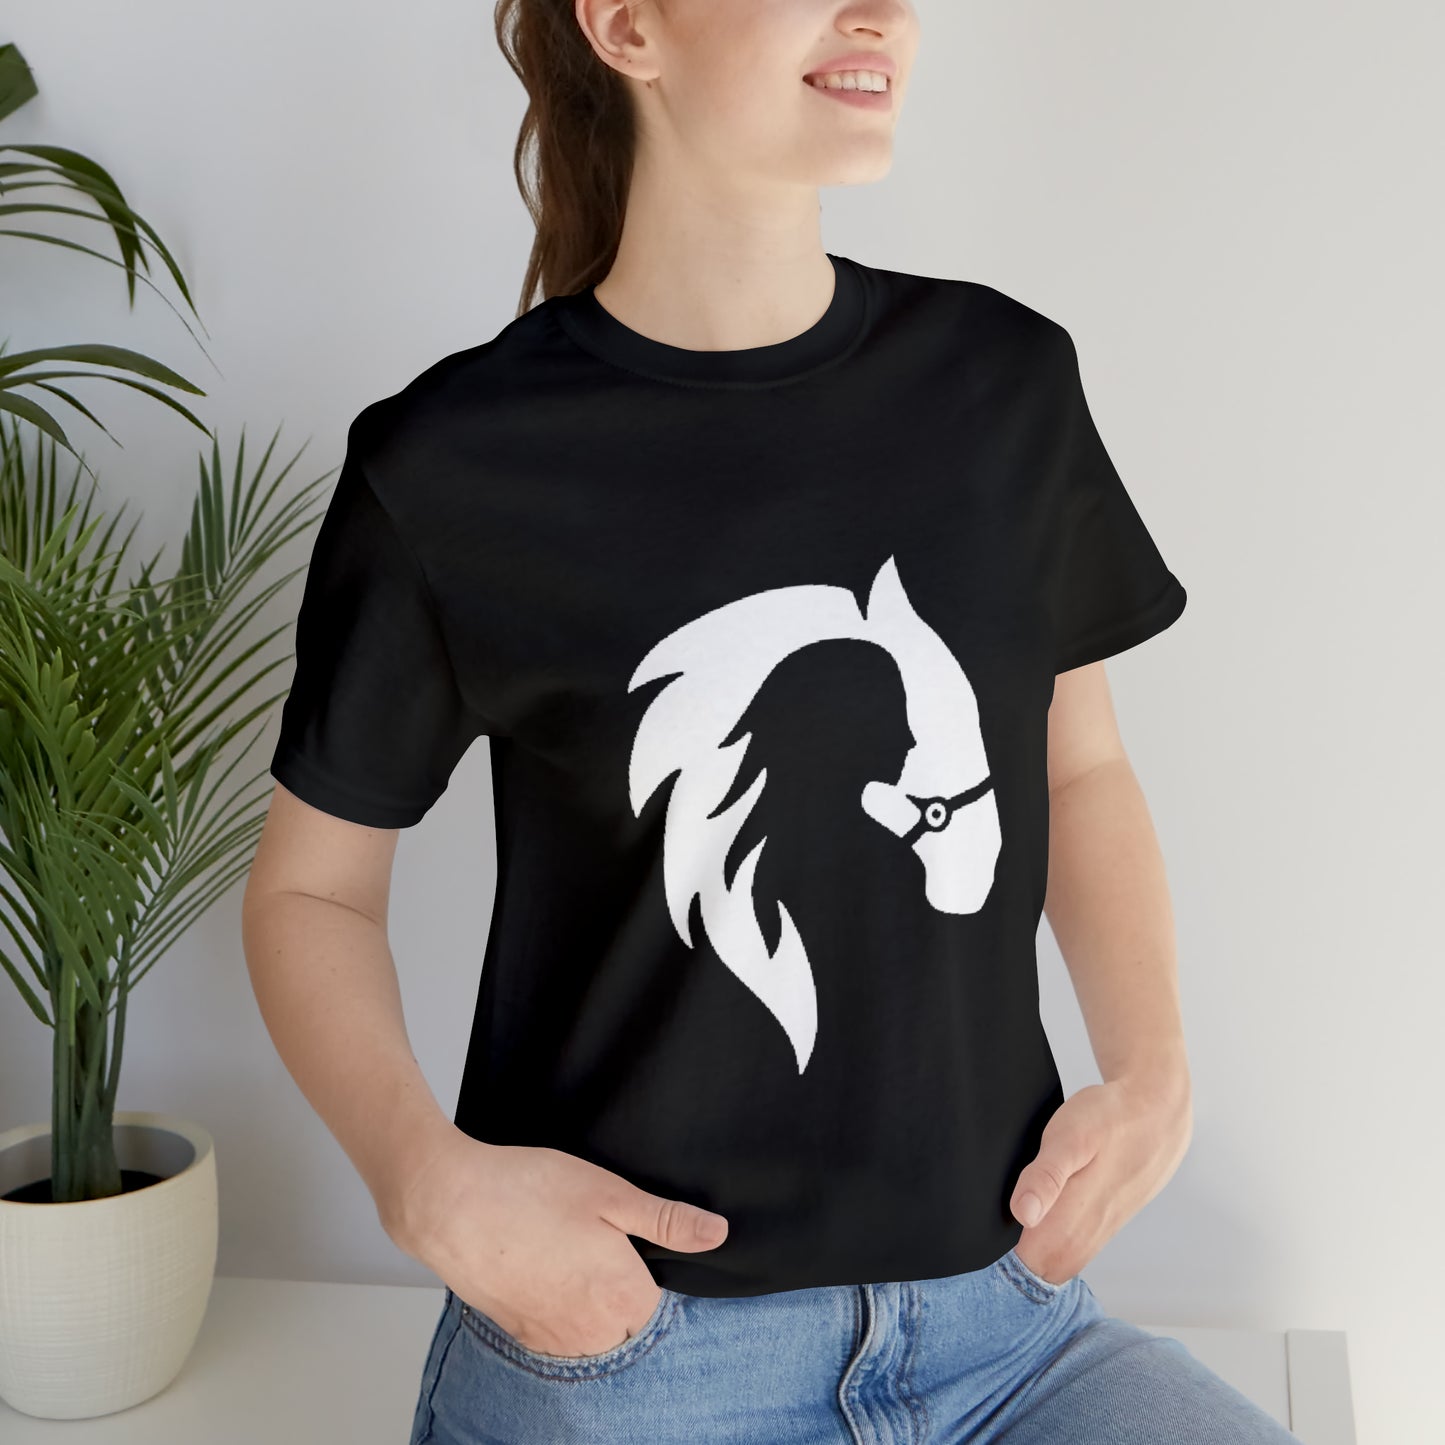 Silhouette of Girl and Horse - Unisex Short Sleeve Tee - Red Logo